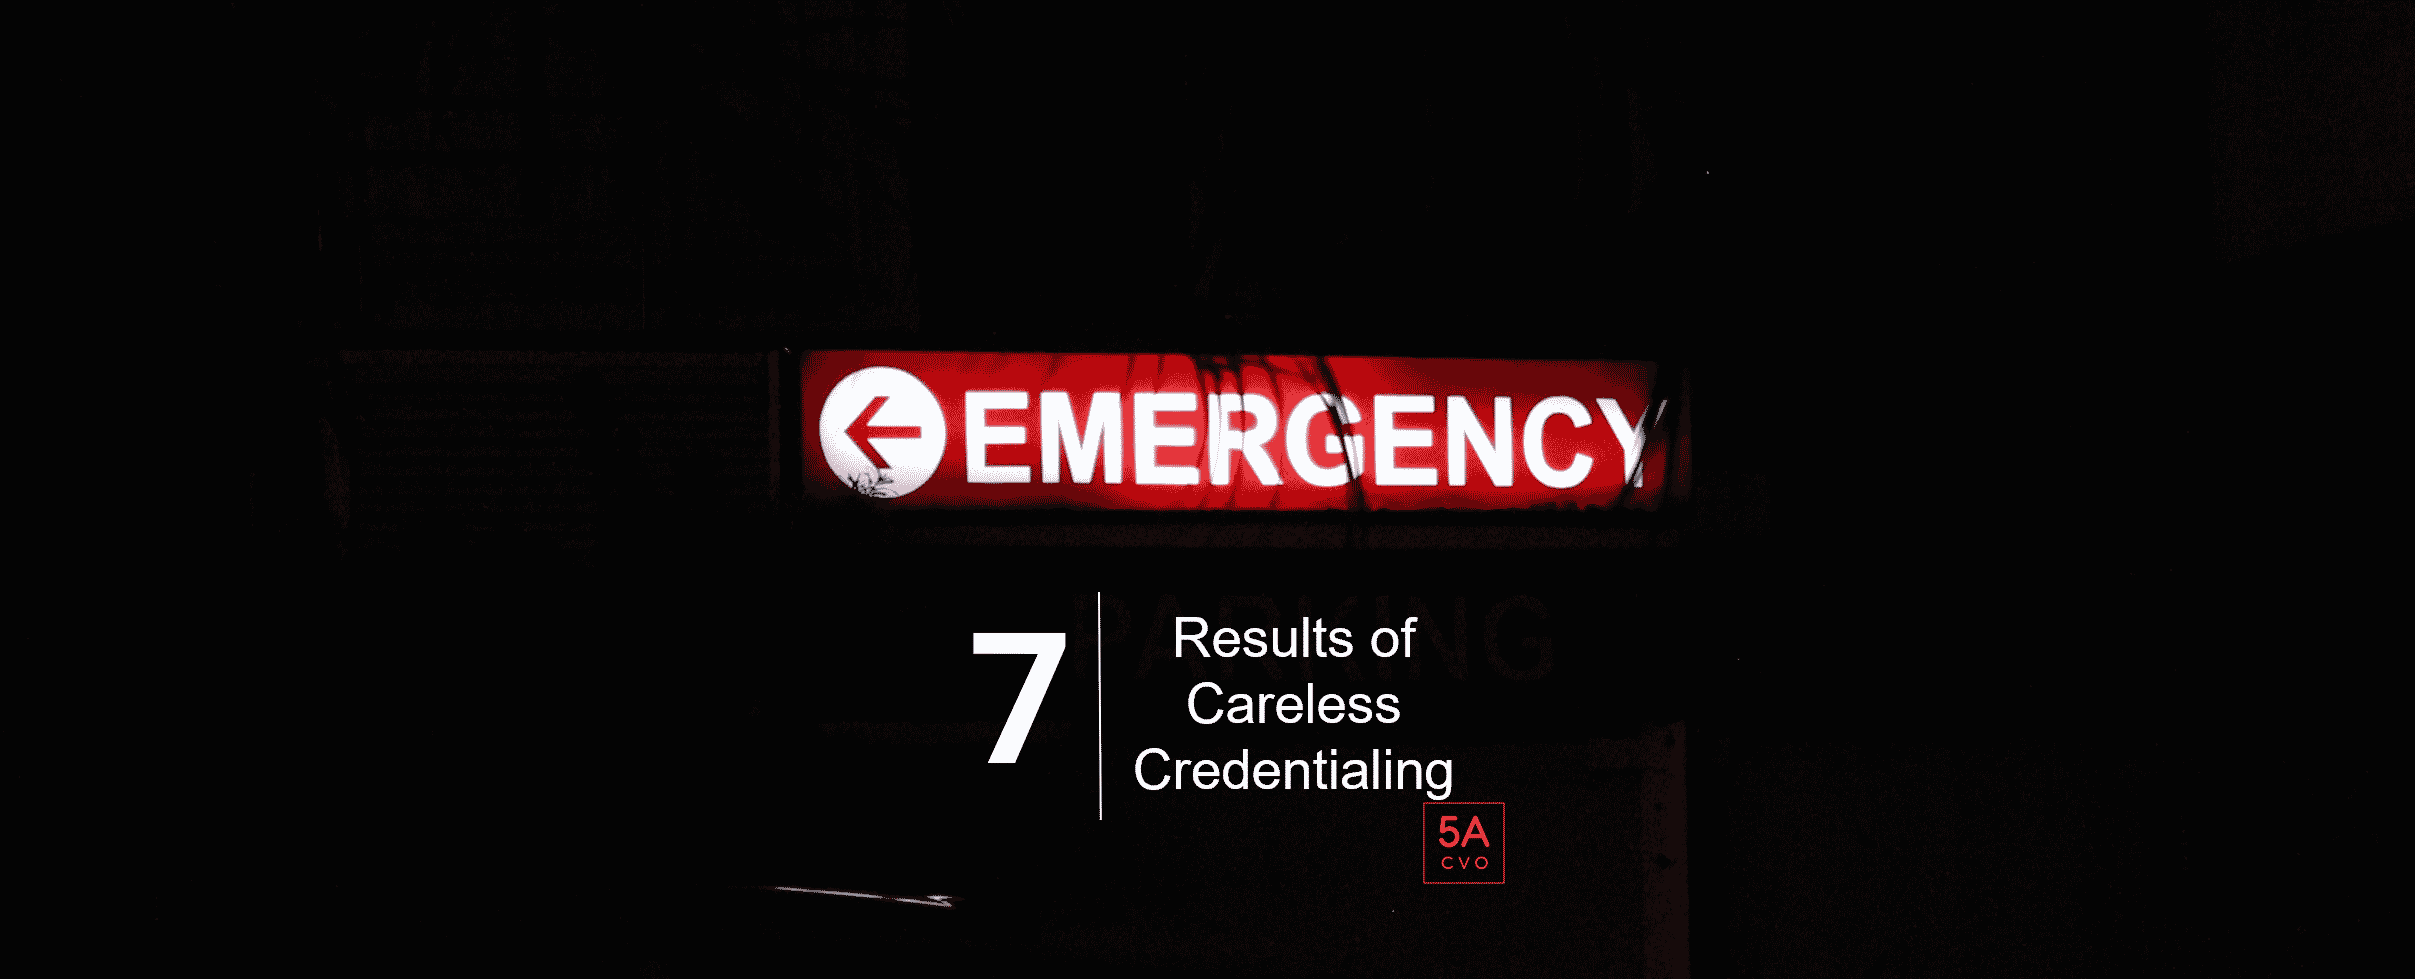 7 Results of Careless Credentialing